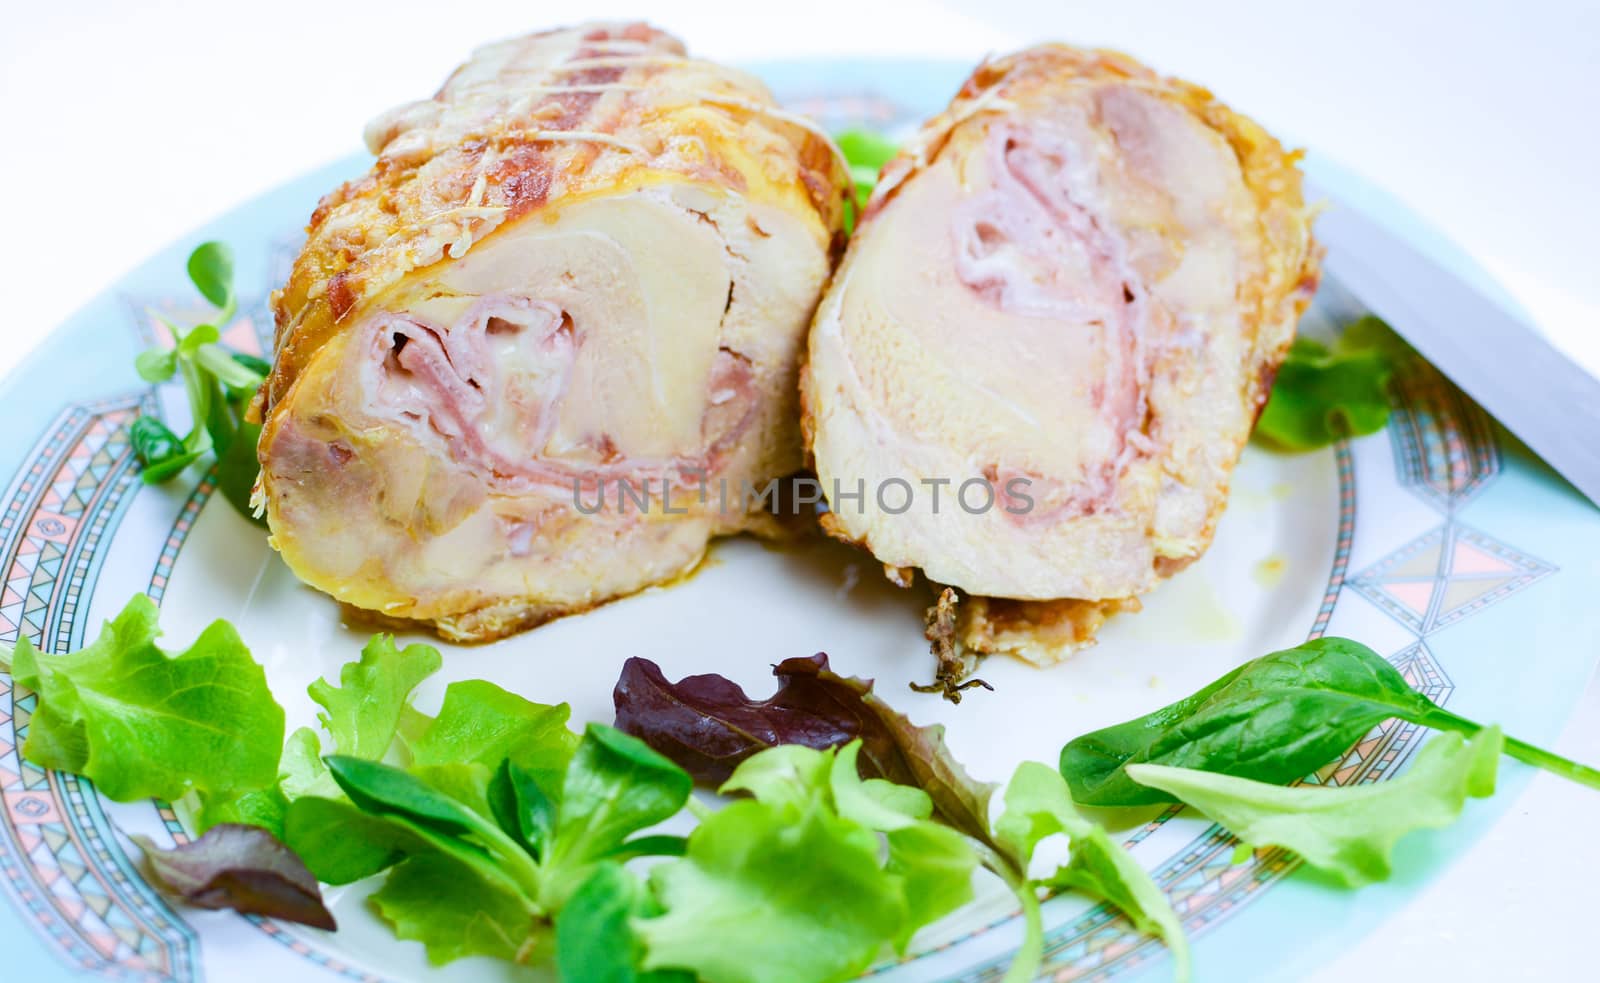 roasted chicken by iacobino